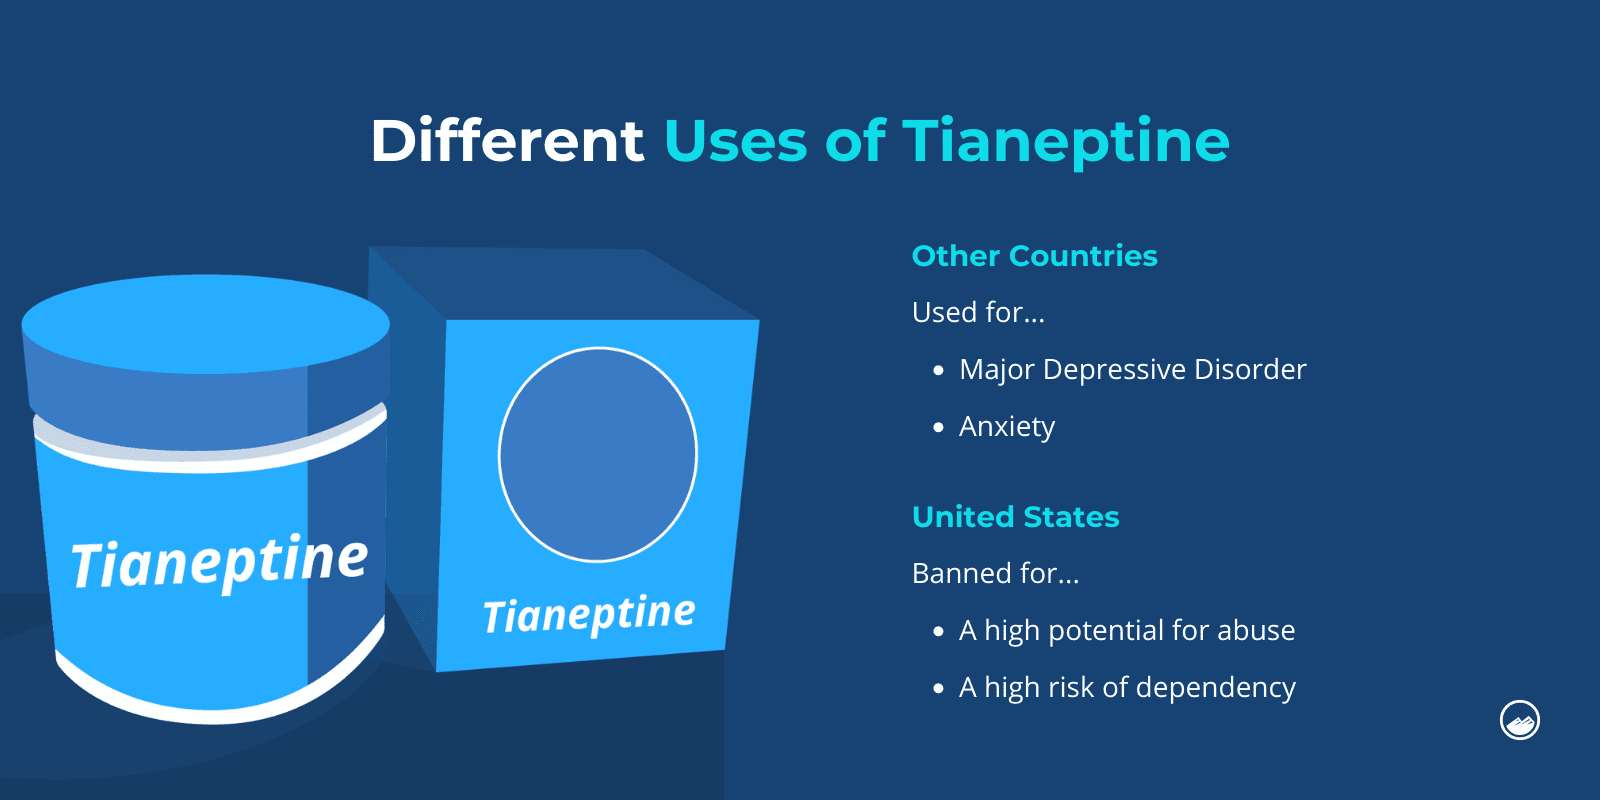 Different Uses of Tianeptine Infographic